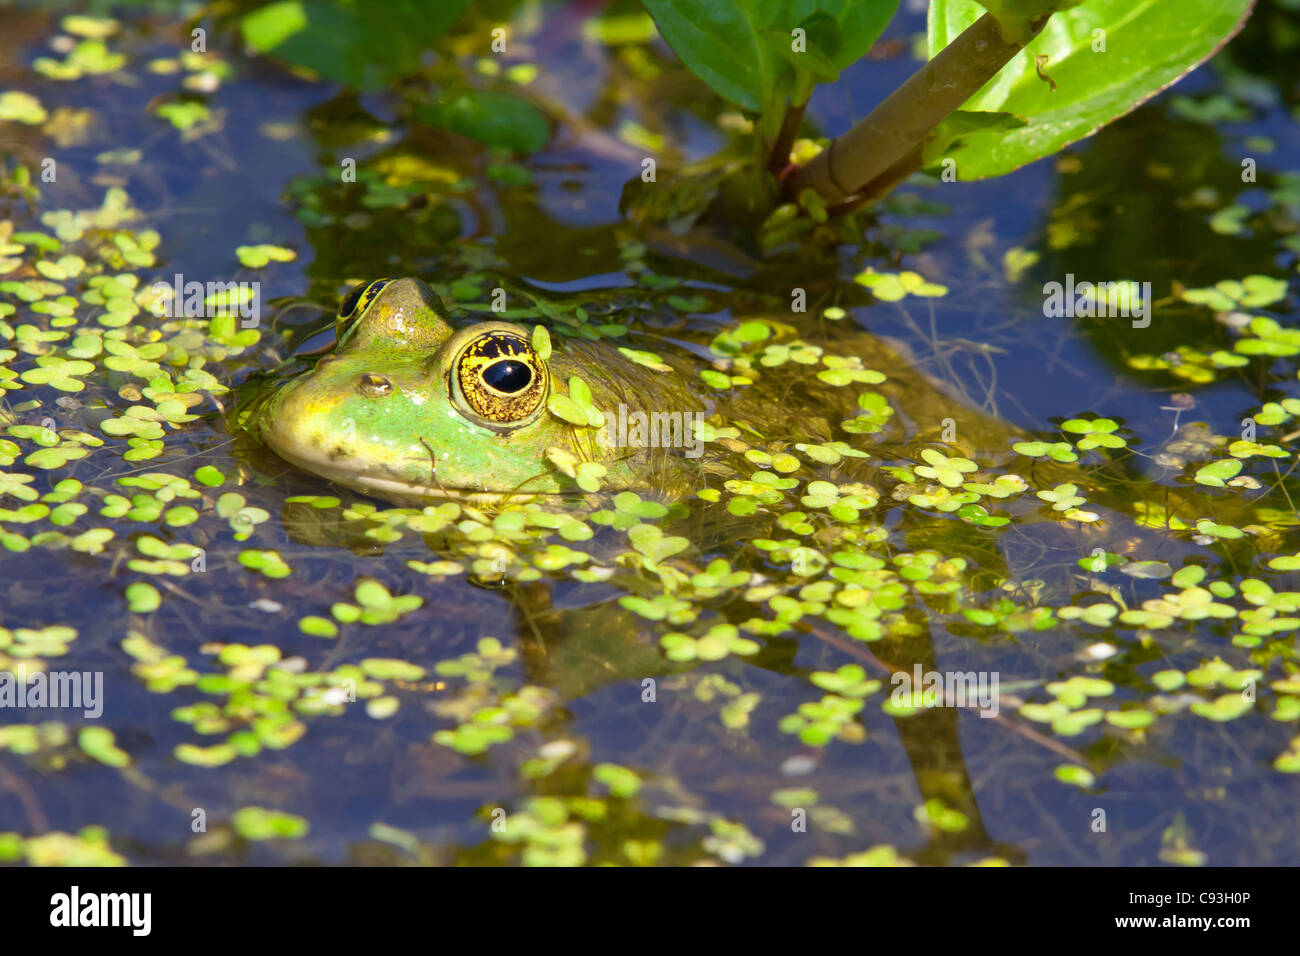 Common toad lurking in a pond Stock Photo